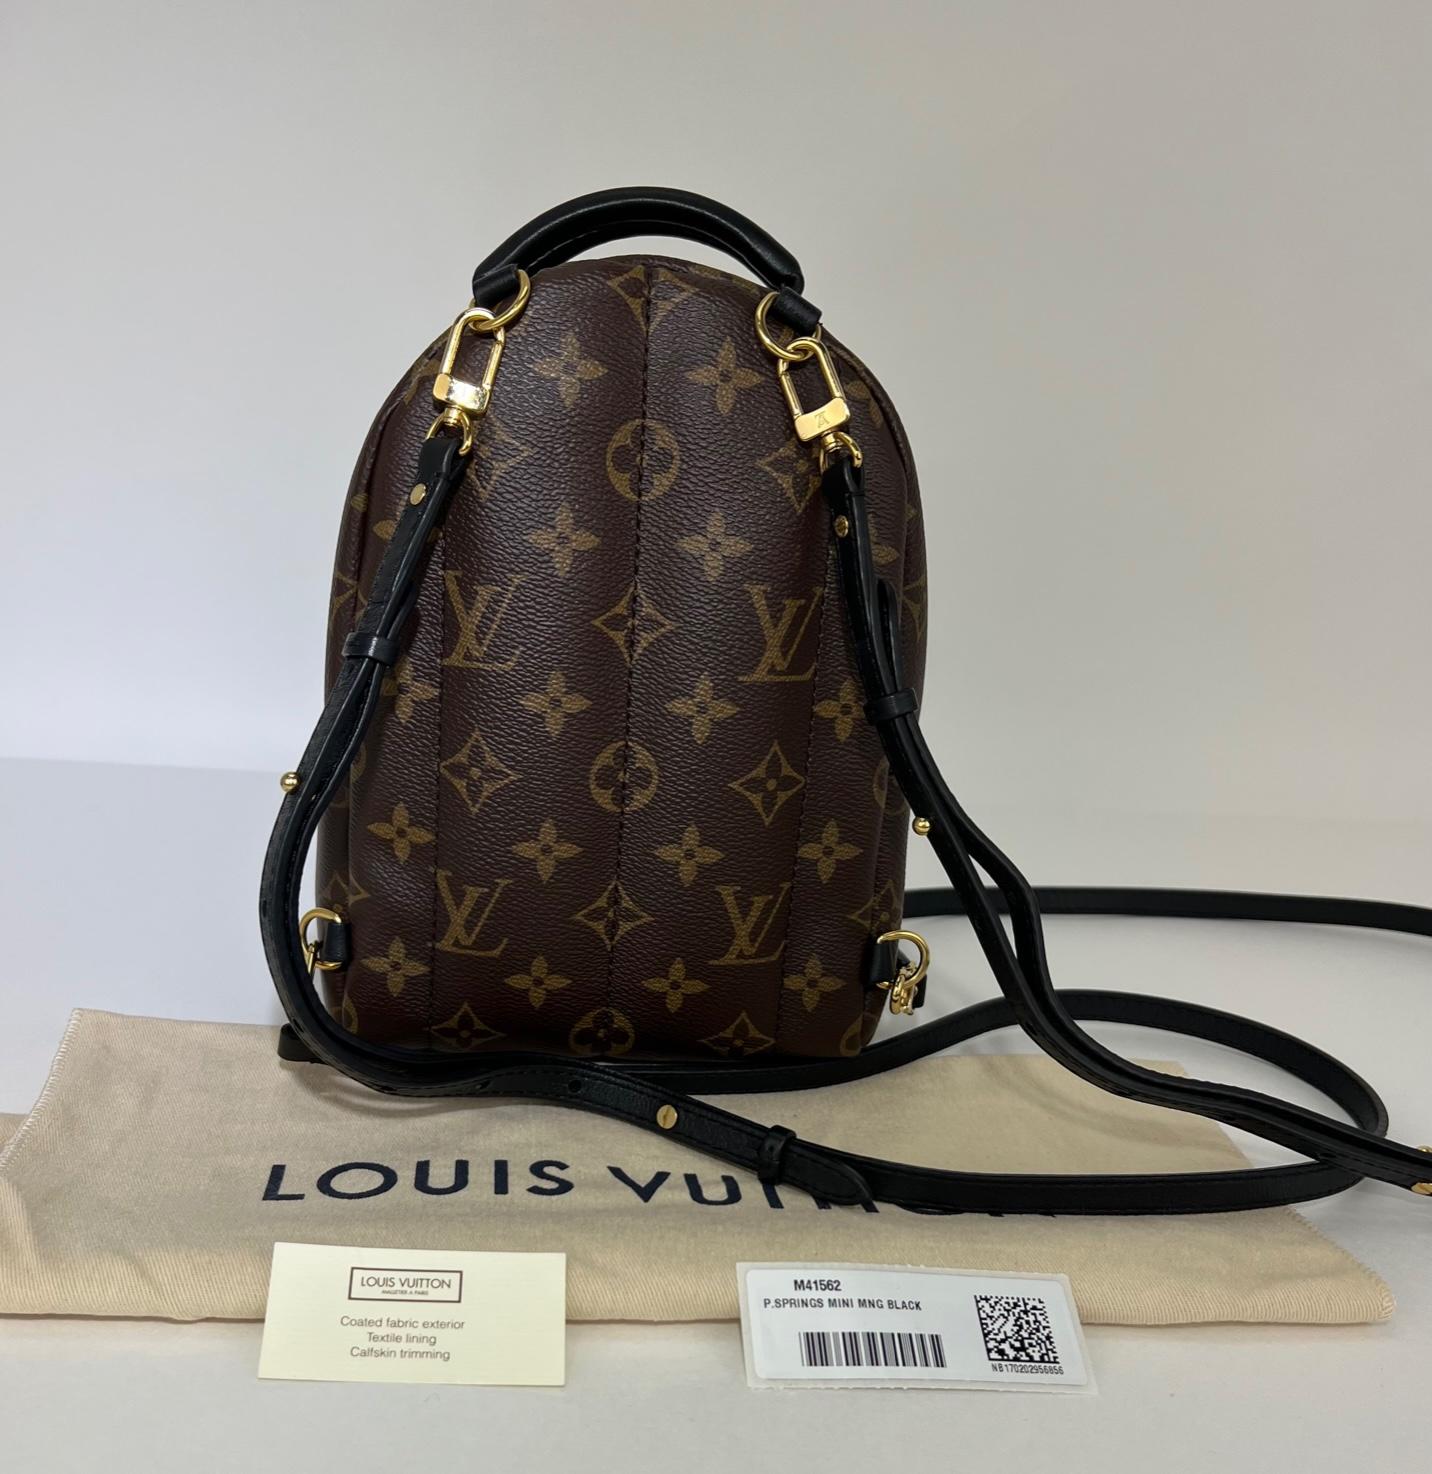 Pre-Owned  100% Authentic
LOUIS VUITTON Palm Springs Mini Monogram Backpack 
RATING: A...Excellent, near mint, only slight 
signs of wear
MATERIAL: monogram canvas, leather trim
STRAP: 2 black adjustable leather shoulder straps
37'' to 45''